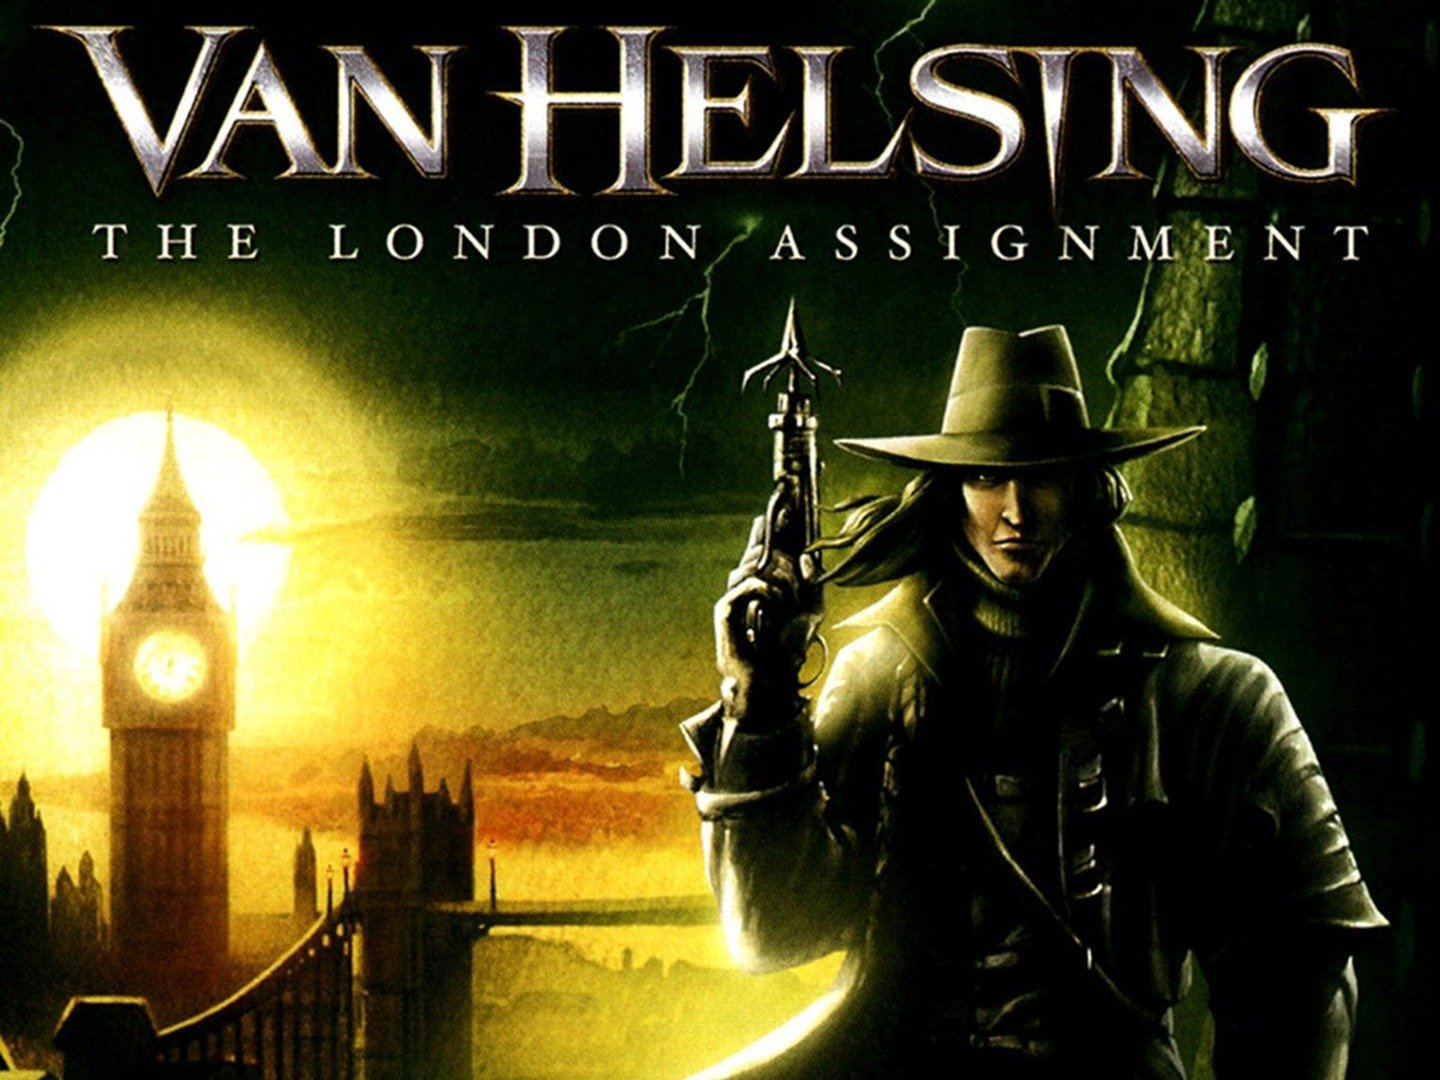 cast of van helsing the london assignment